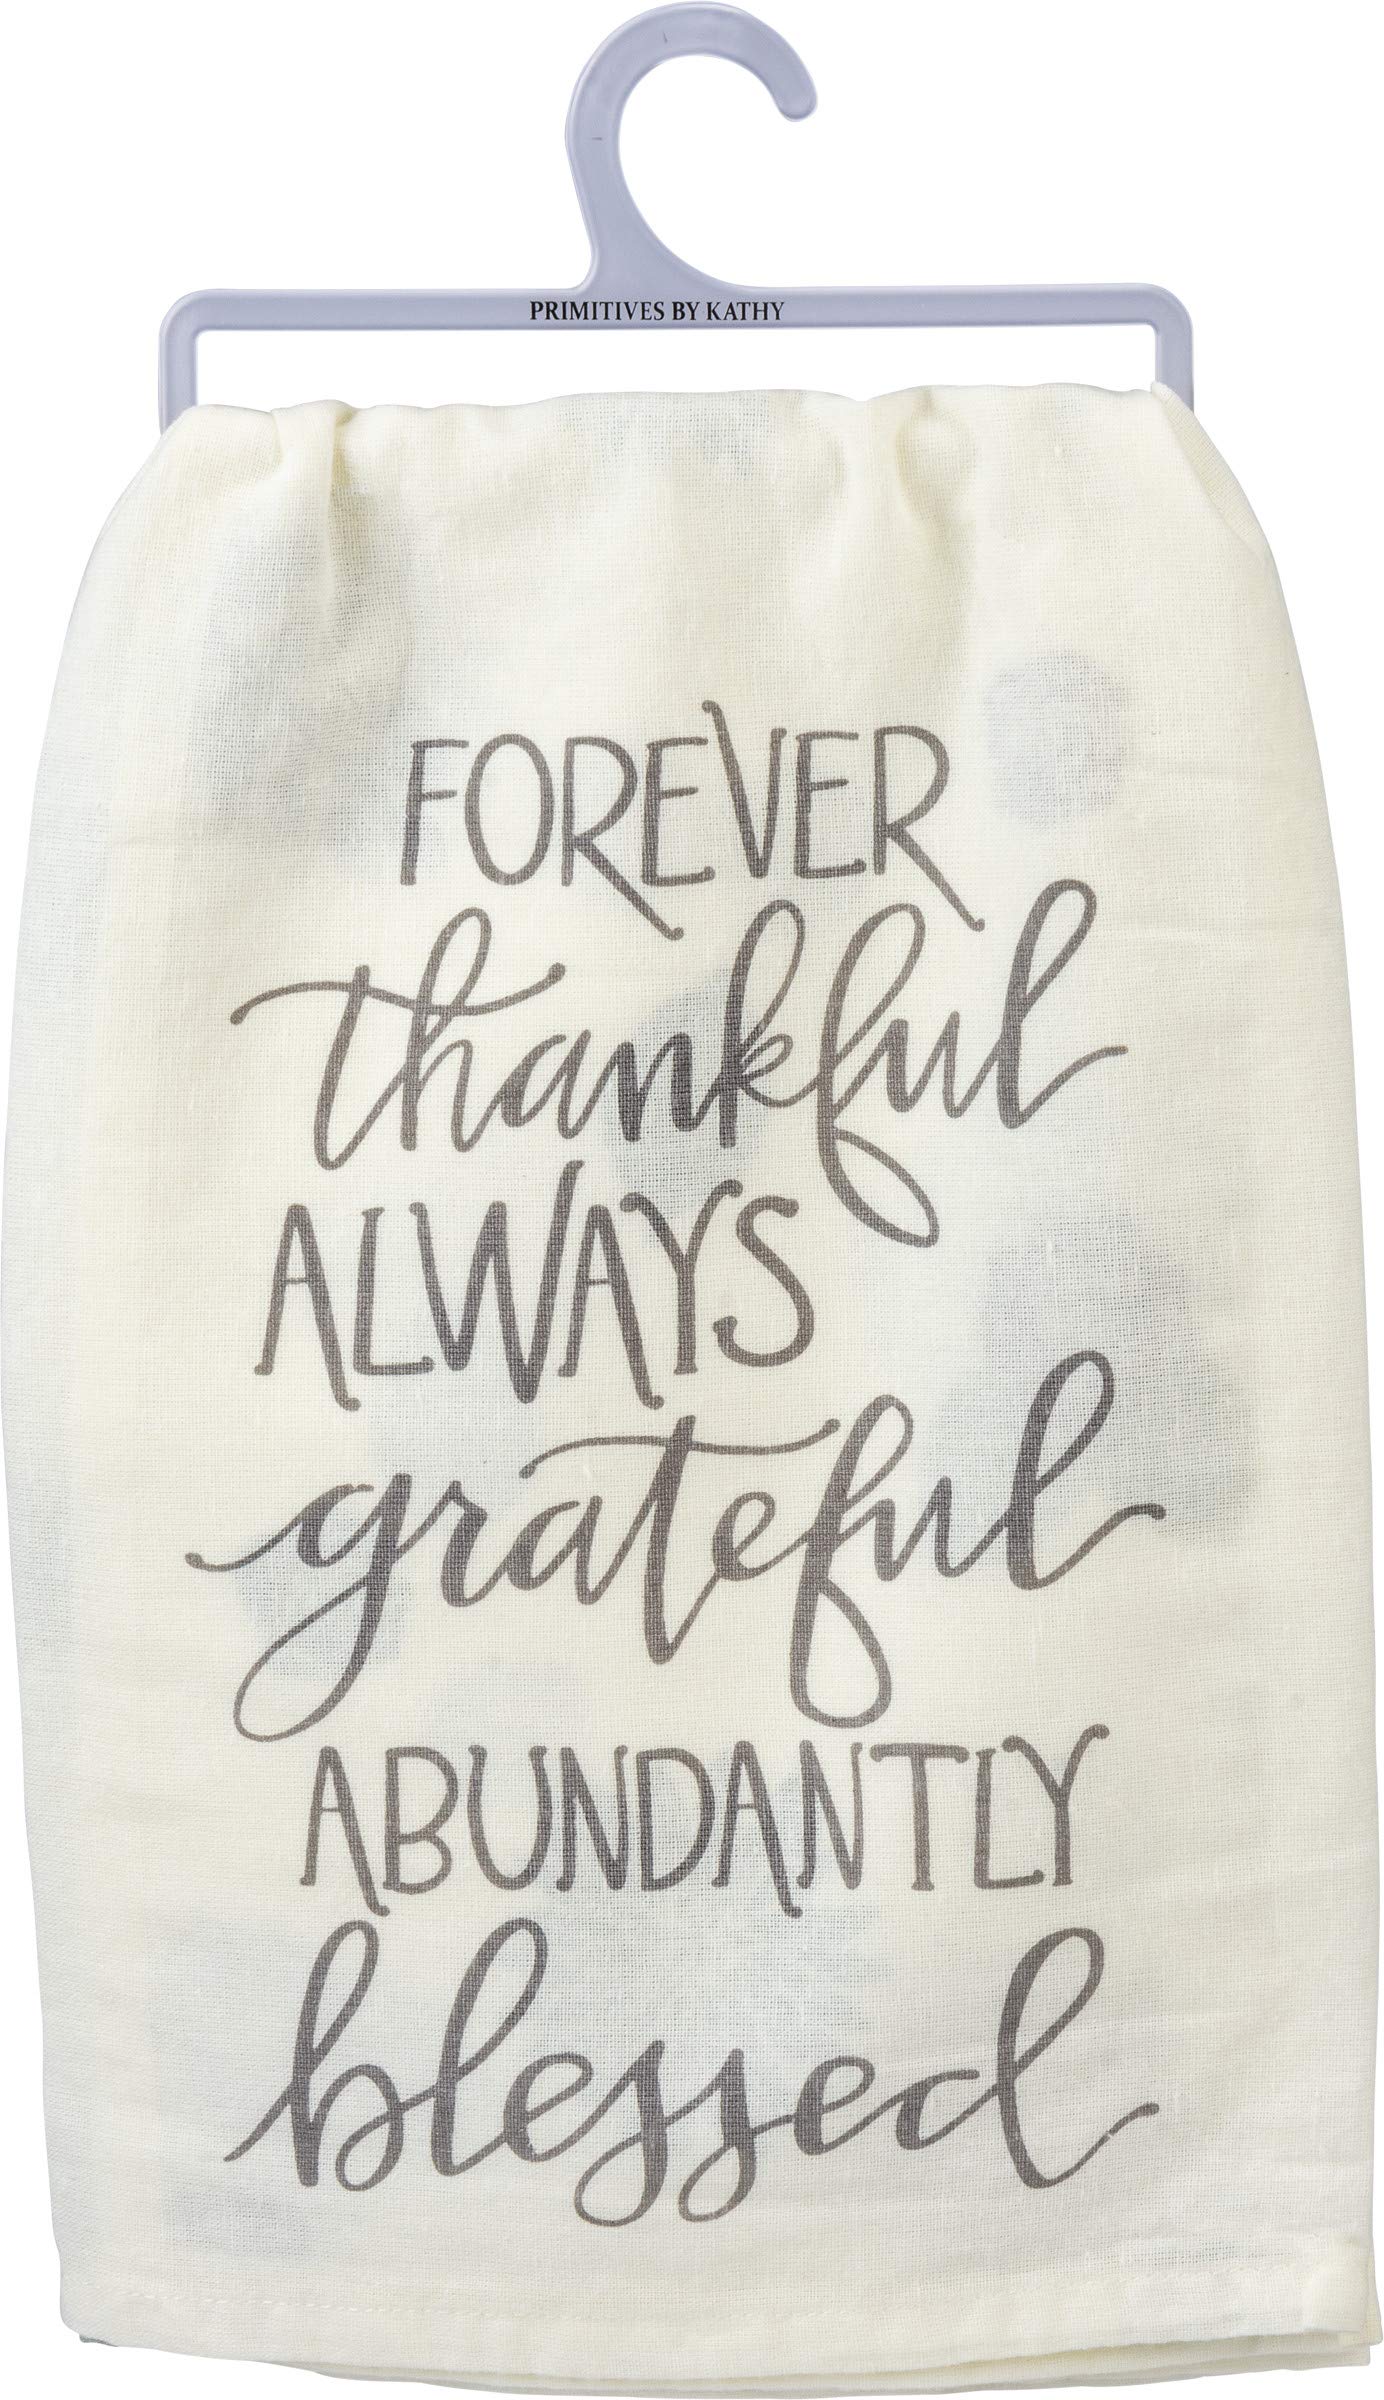 Primitives by Kathy Forever Thankful Always Grateful Abundantly Blessed Home Décor Kitchen Towel